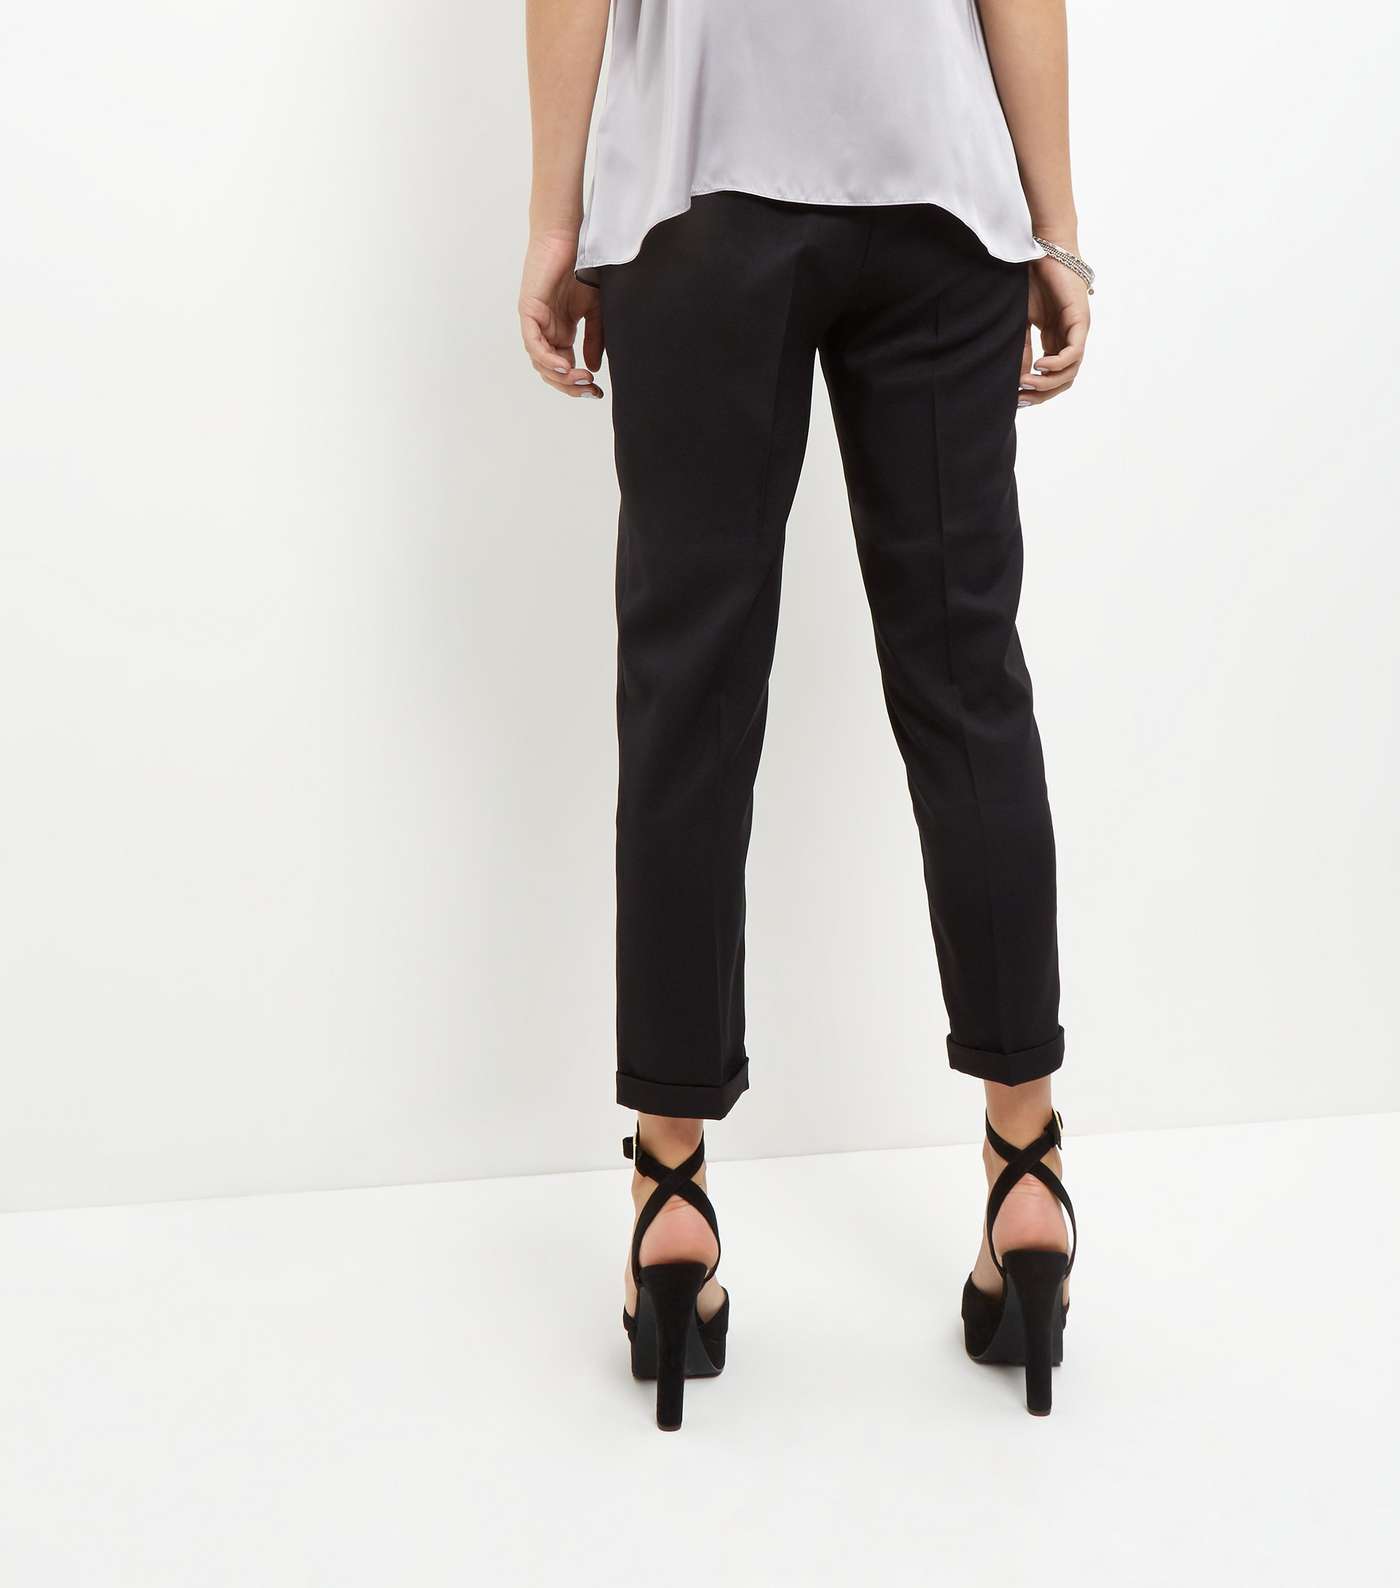 Maternity Black Over Bump Trousers Image 3